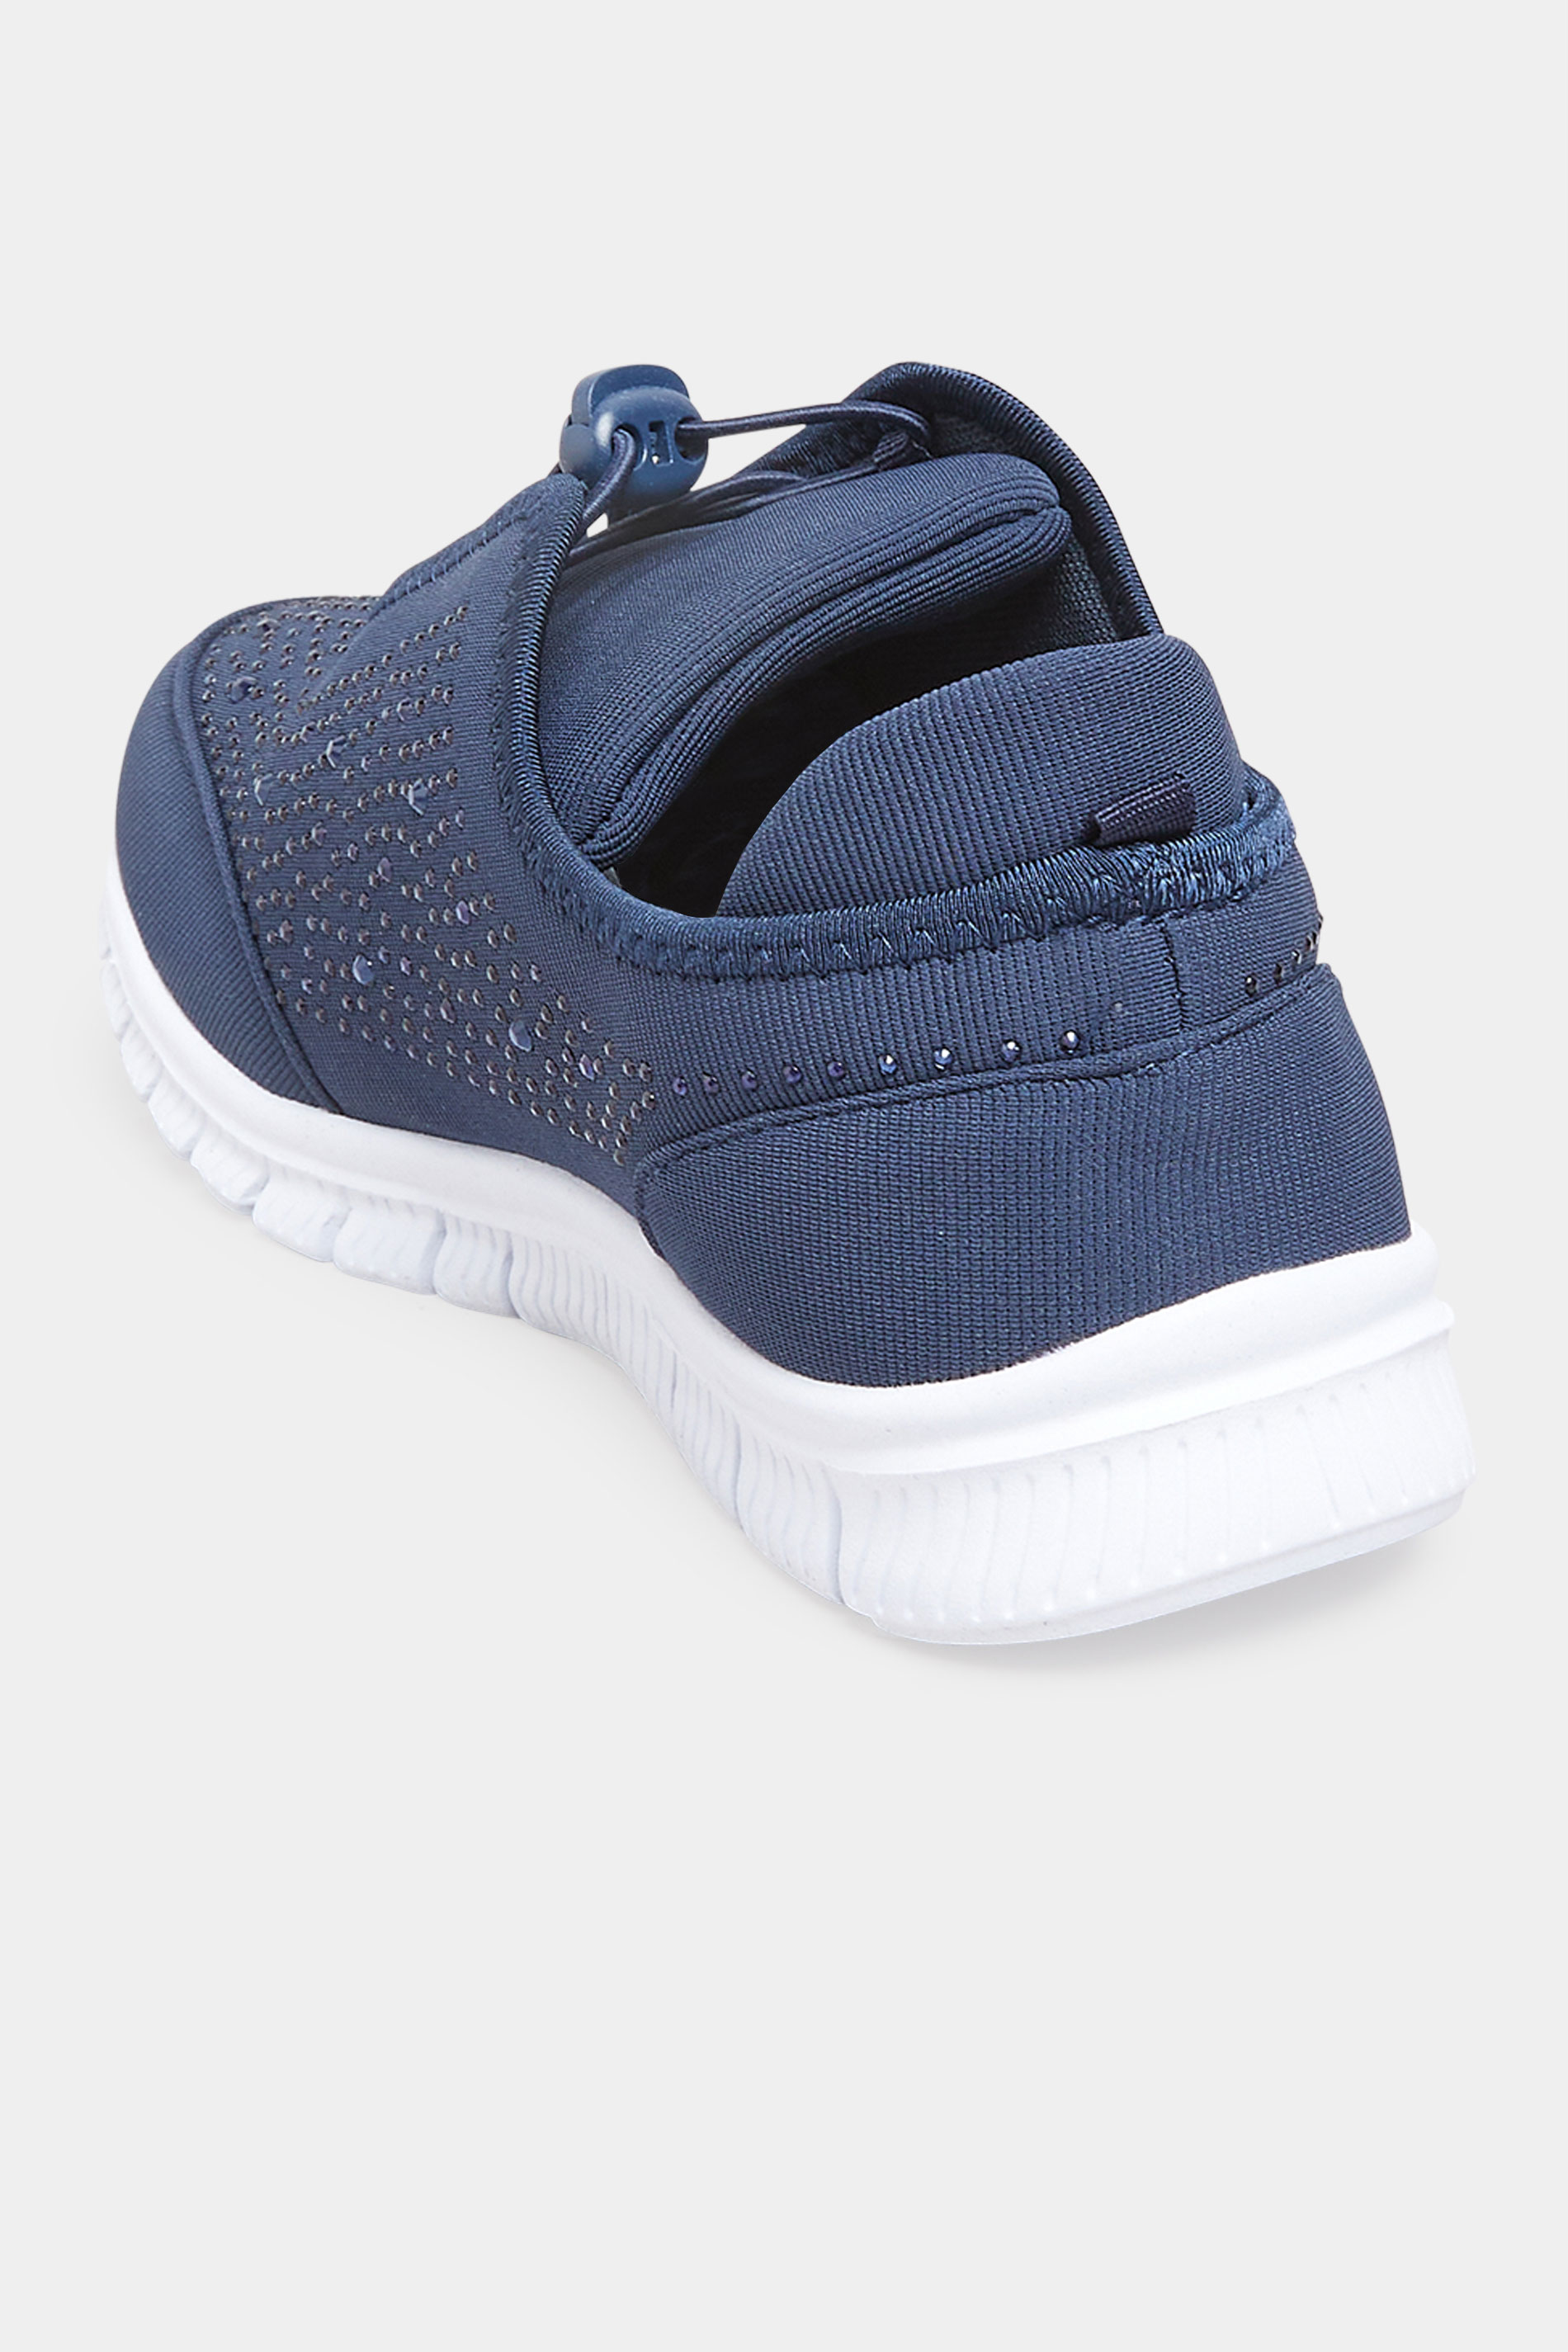 Chaussures Pieds Larges Tennis & Baskets Pieds Larges | Baskets Bleues Marine Empiècement Strass Pieds Larges EEE - TB28956